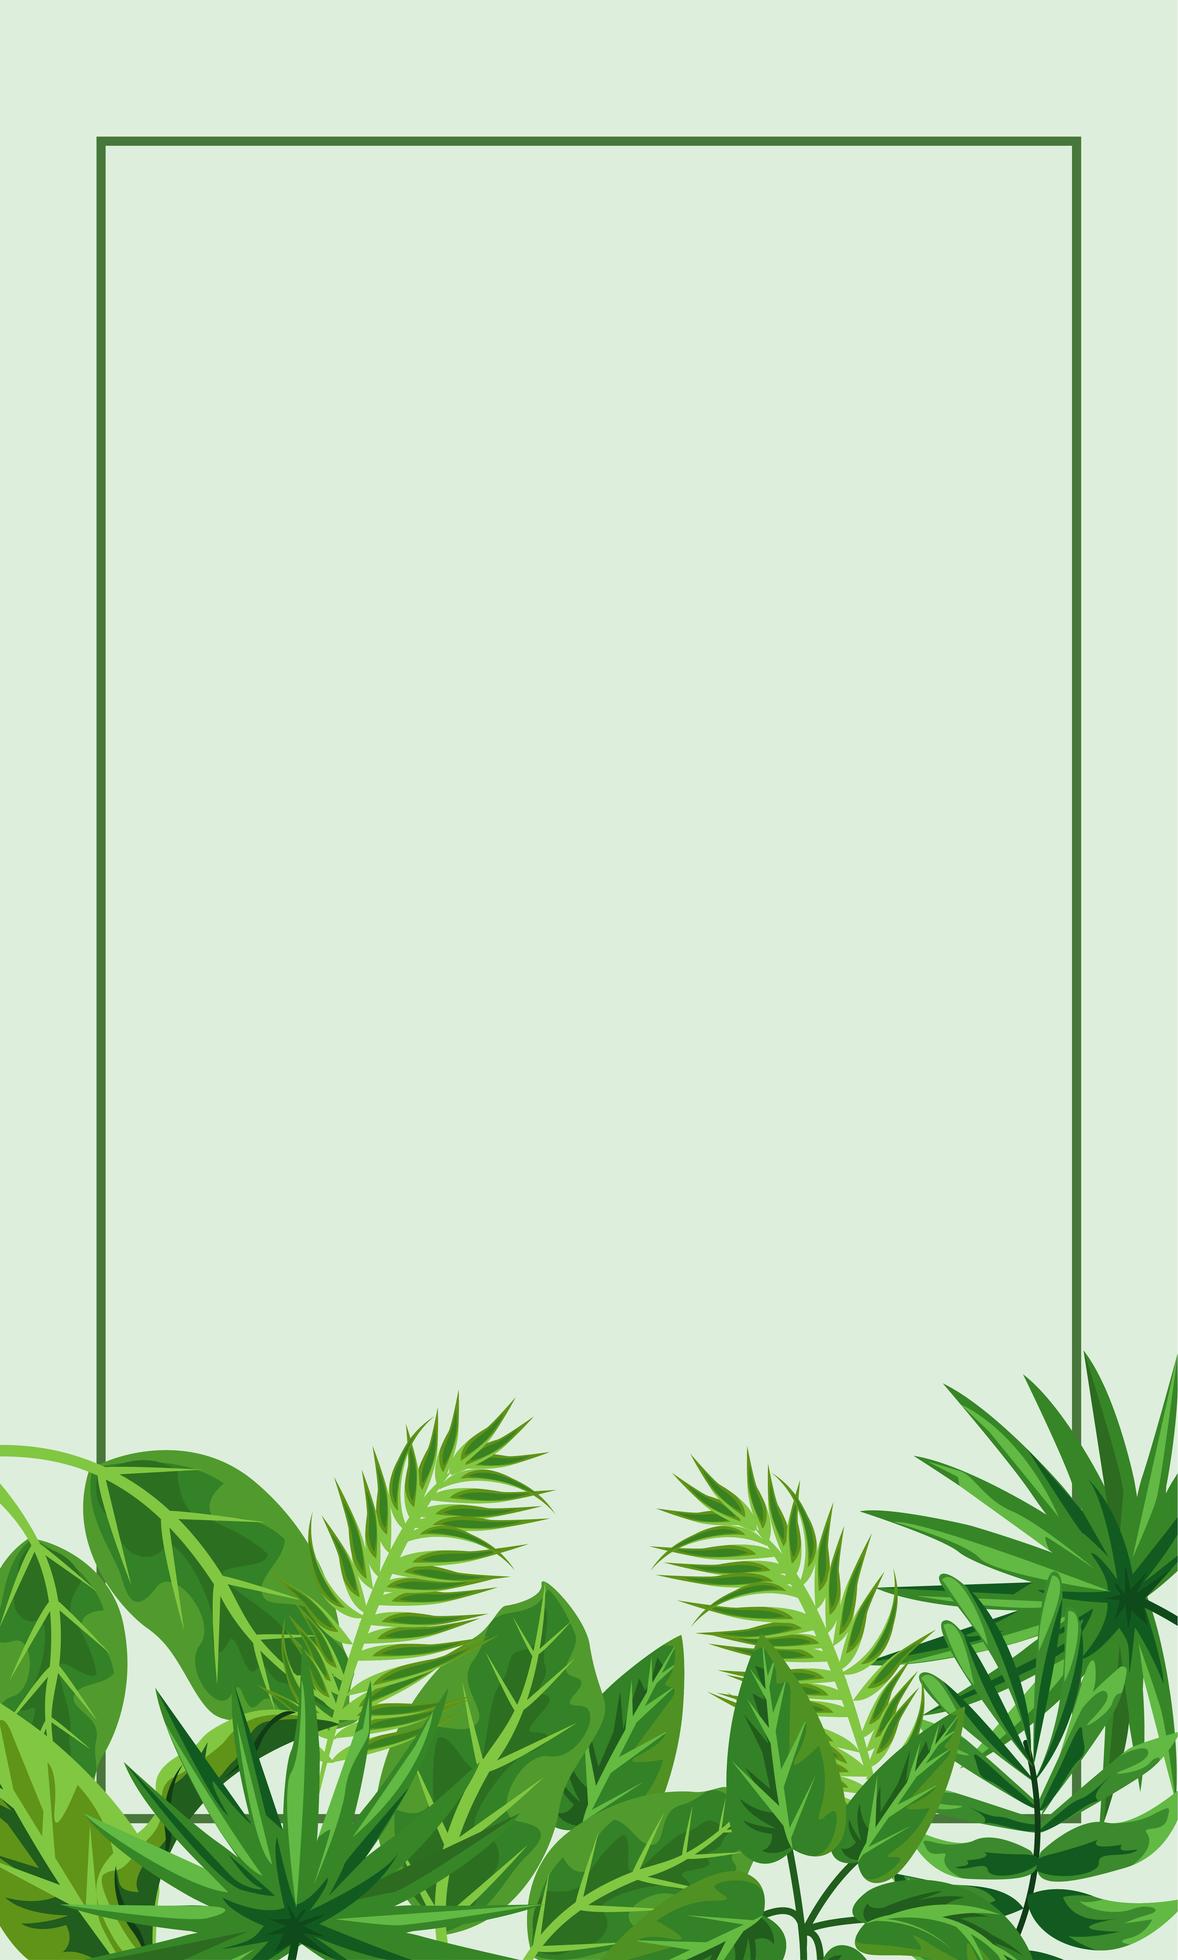 tropical frame decorative with green leafs and green background 2528588 ...